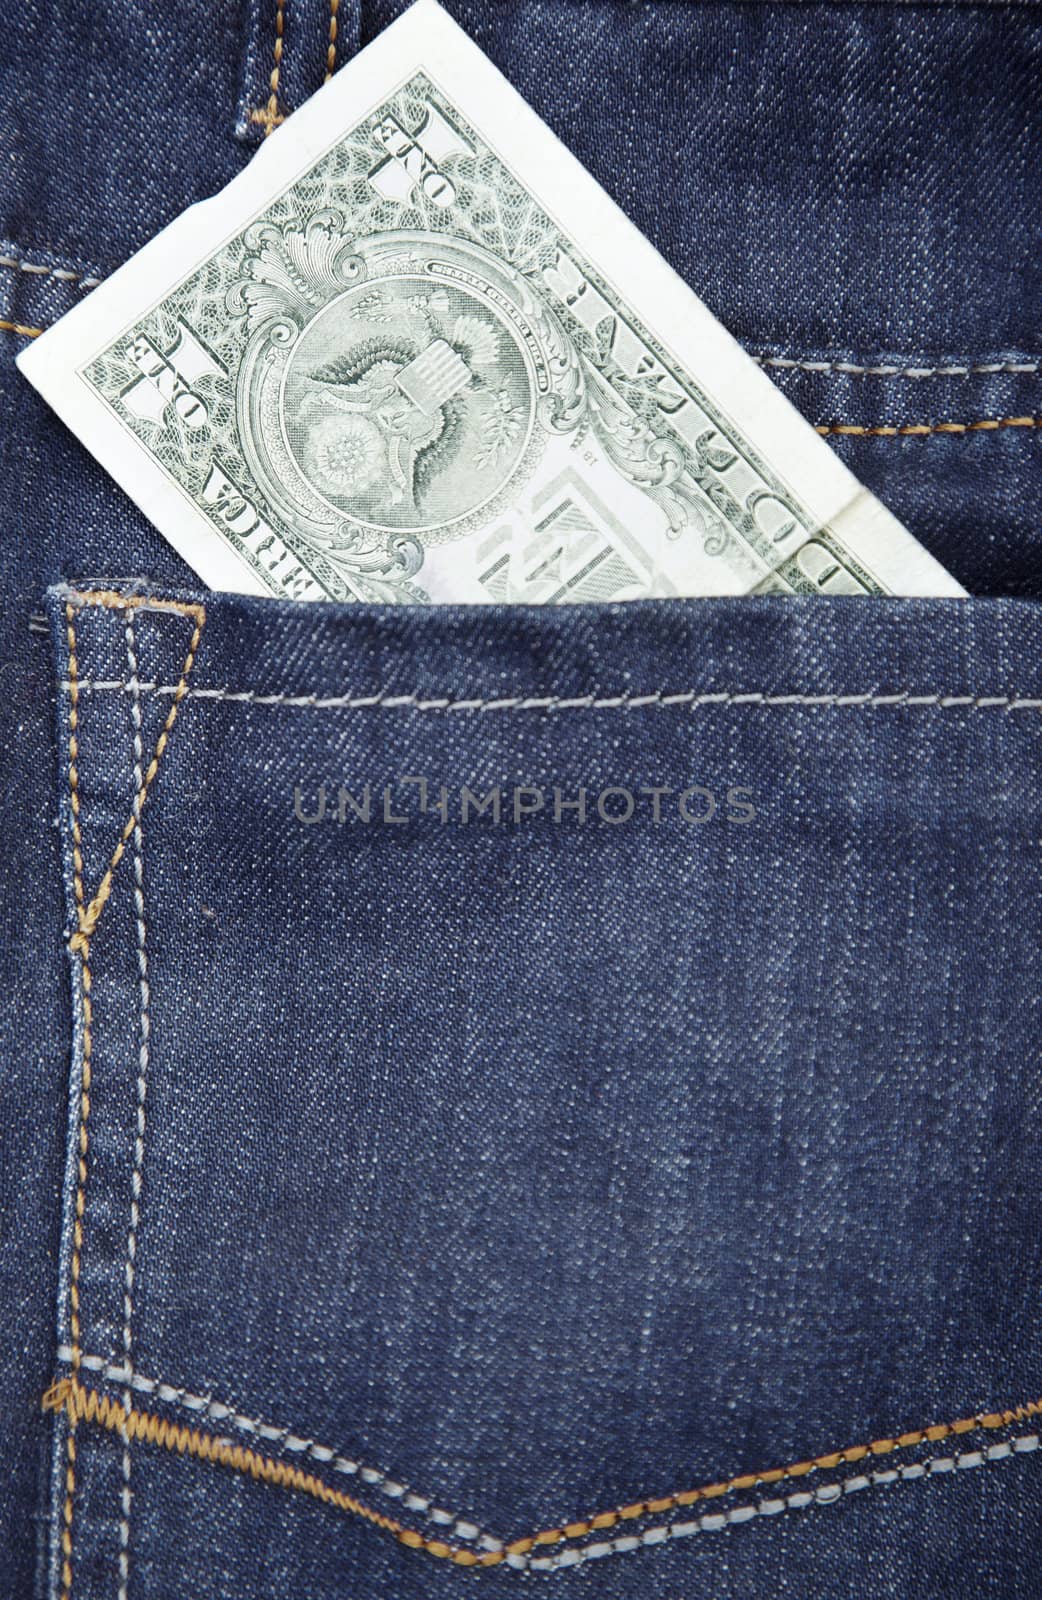 Jeans and dollar by Novic